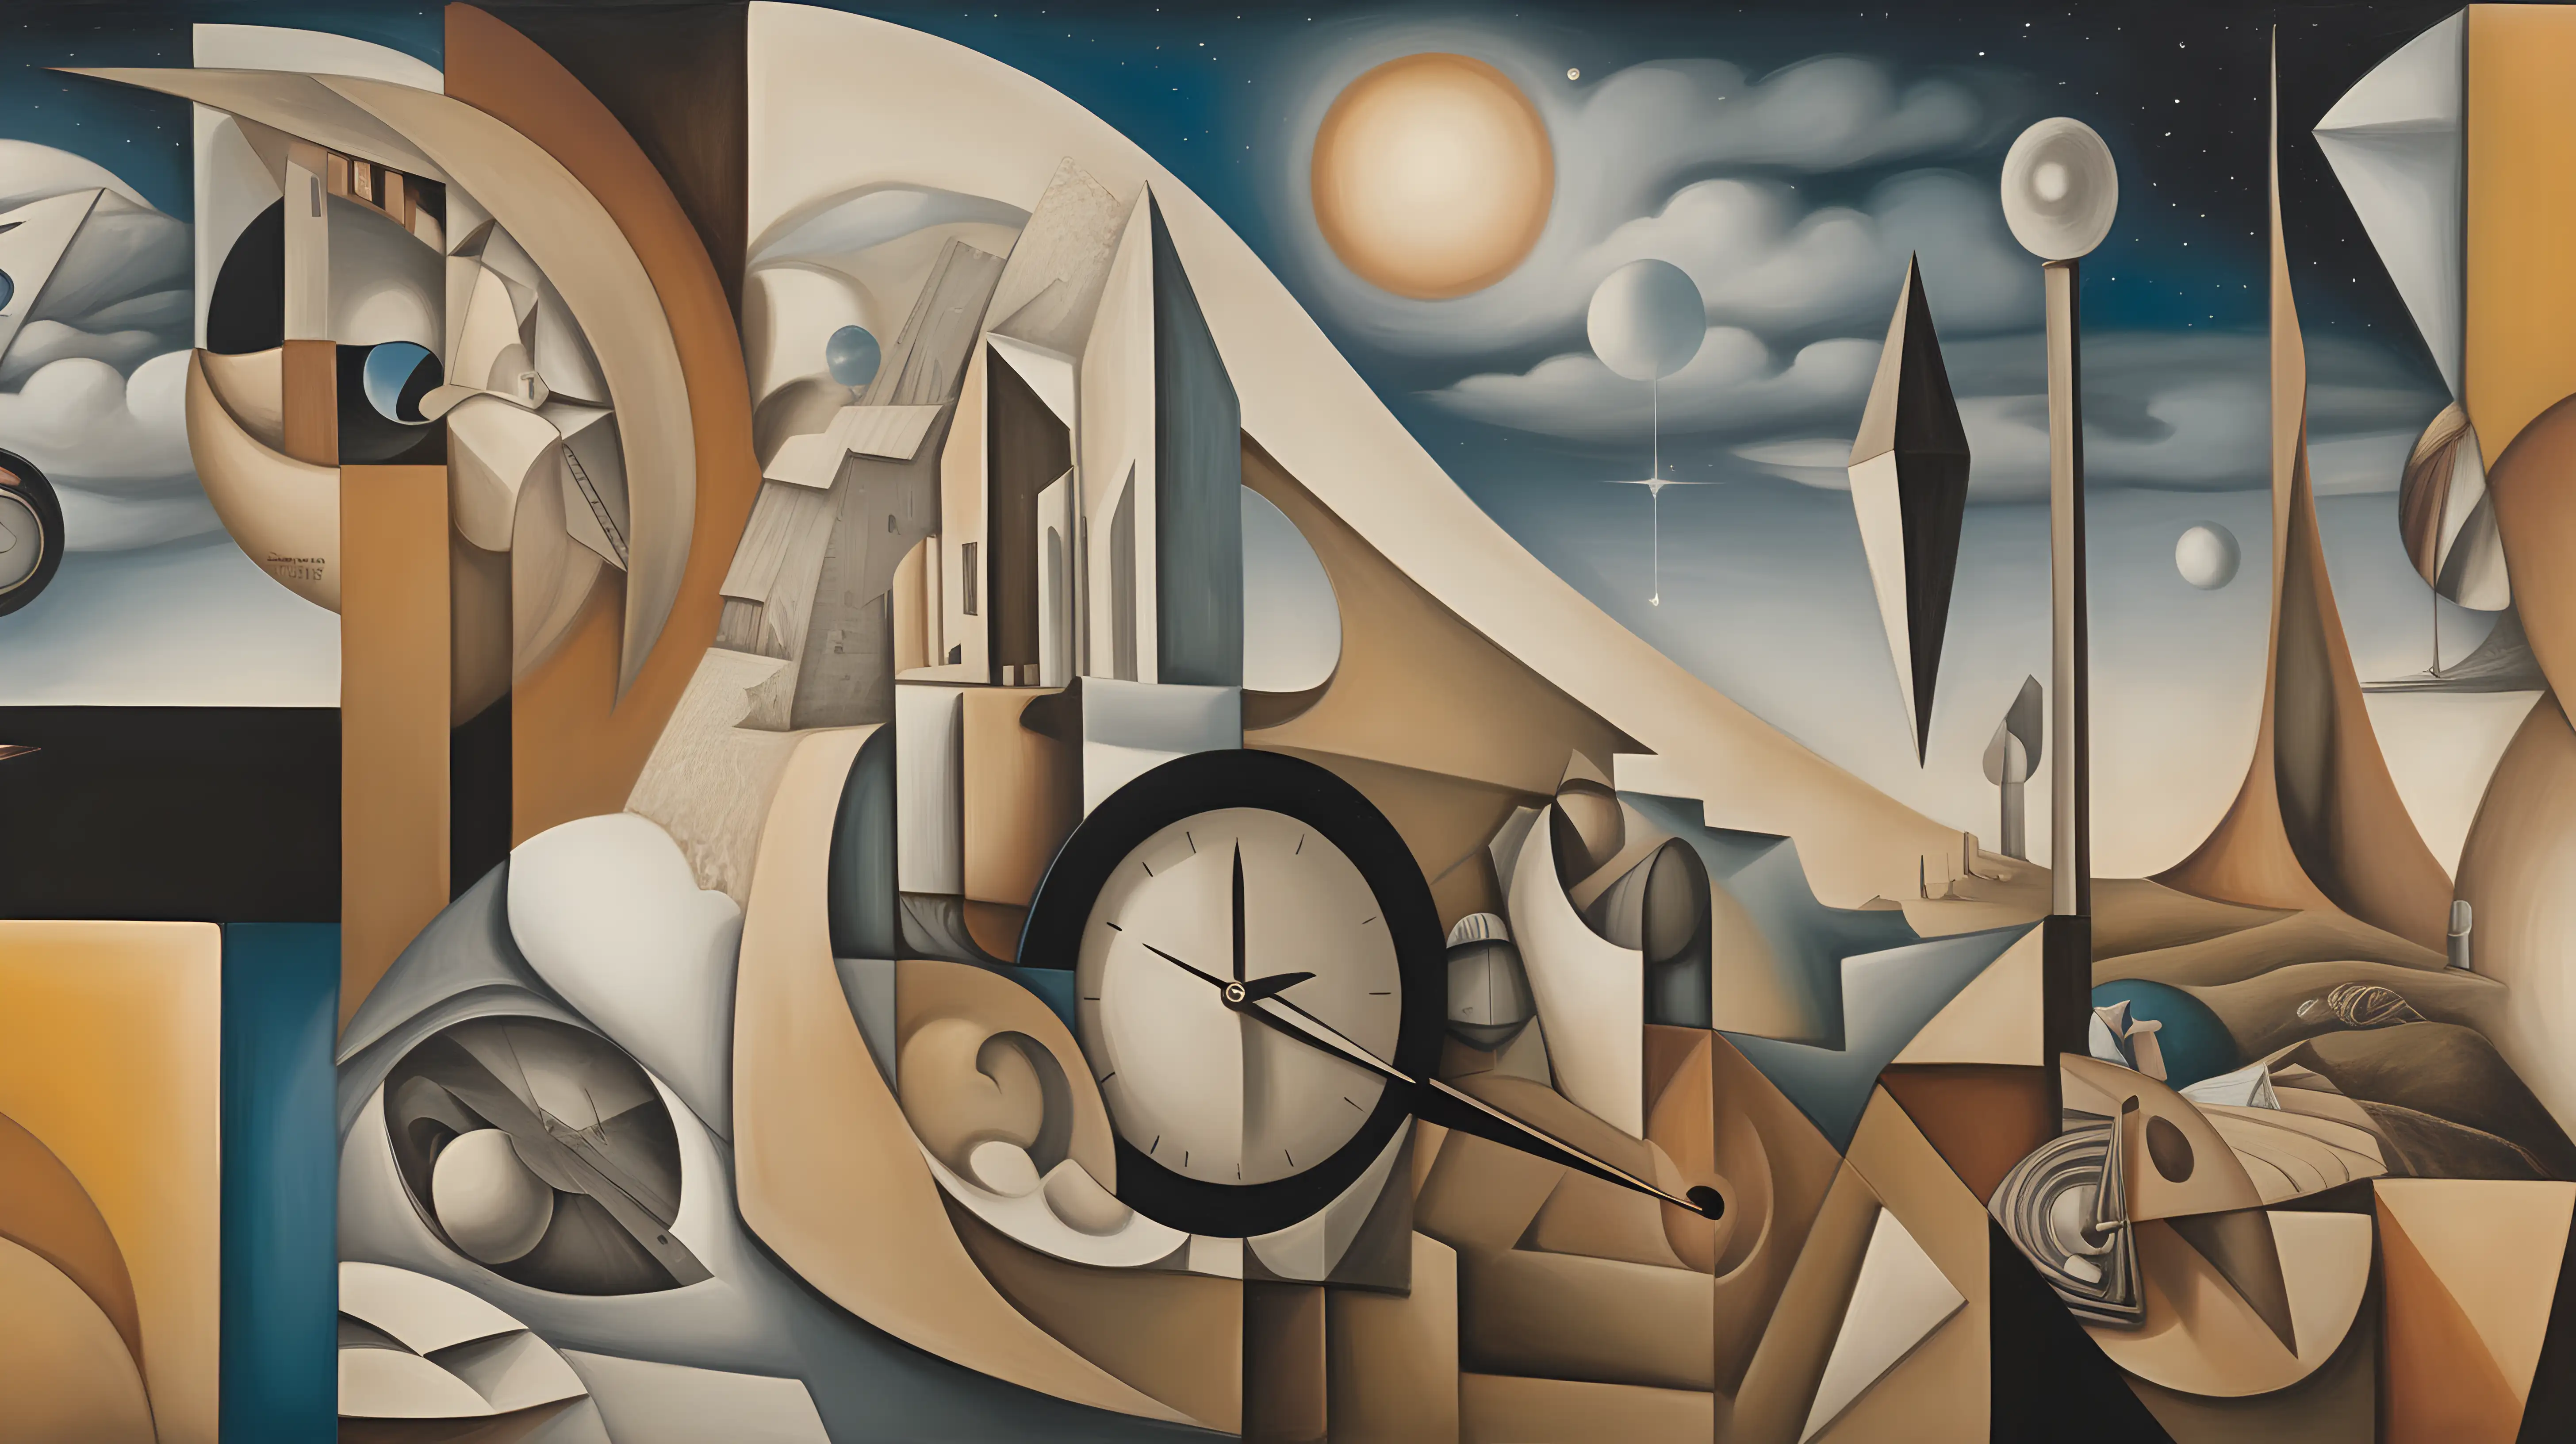 Dreaming in Cubist Time: Explore the concept of time as fluid and nonlinear in a Cubist dreamscape, where past, present, and future intersect in a mesmerizing collage of moments.